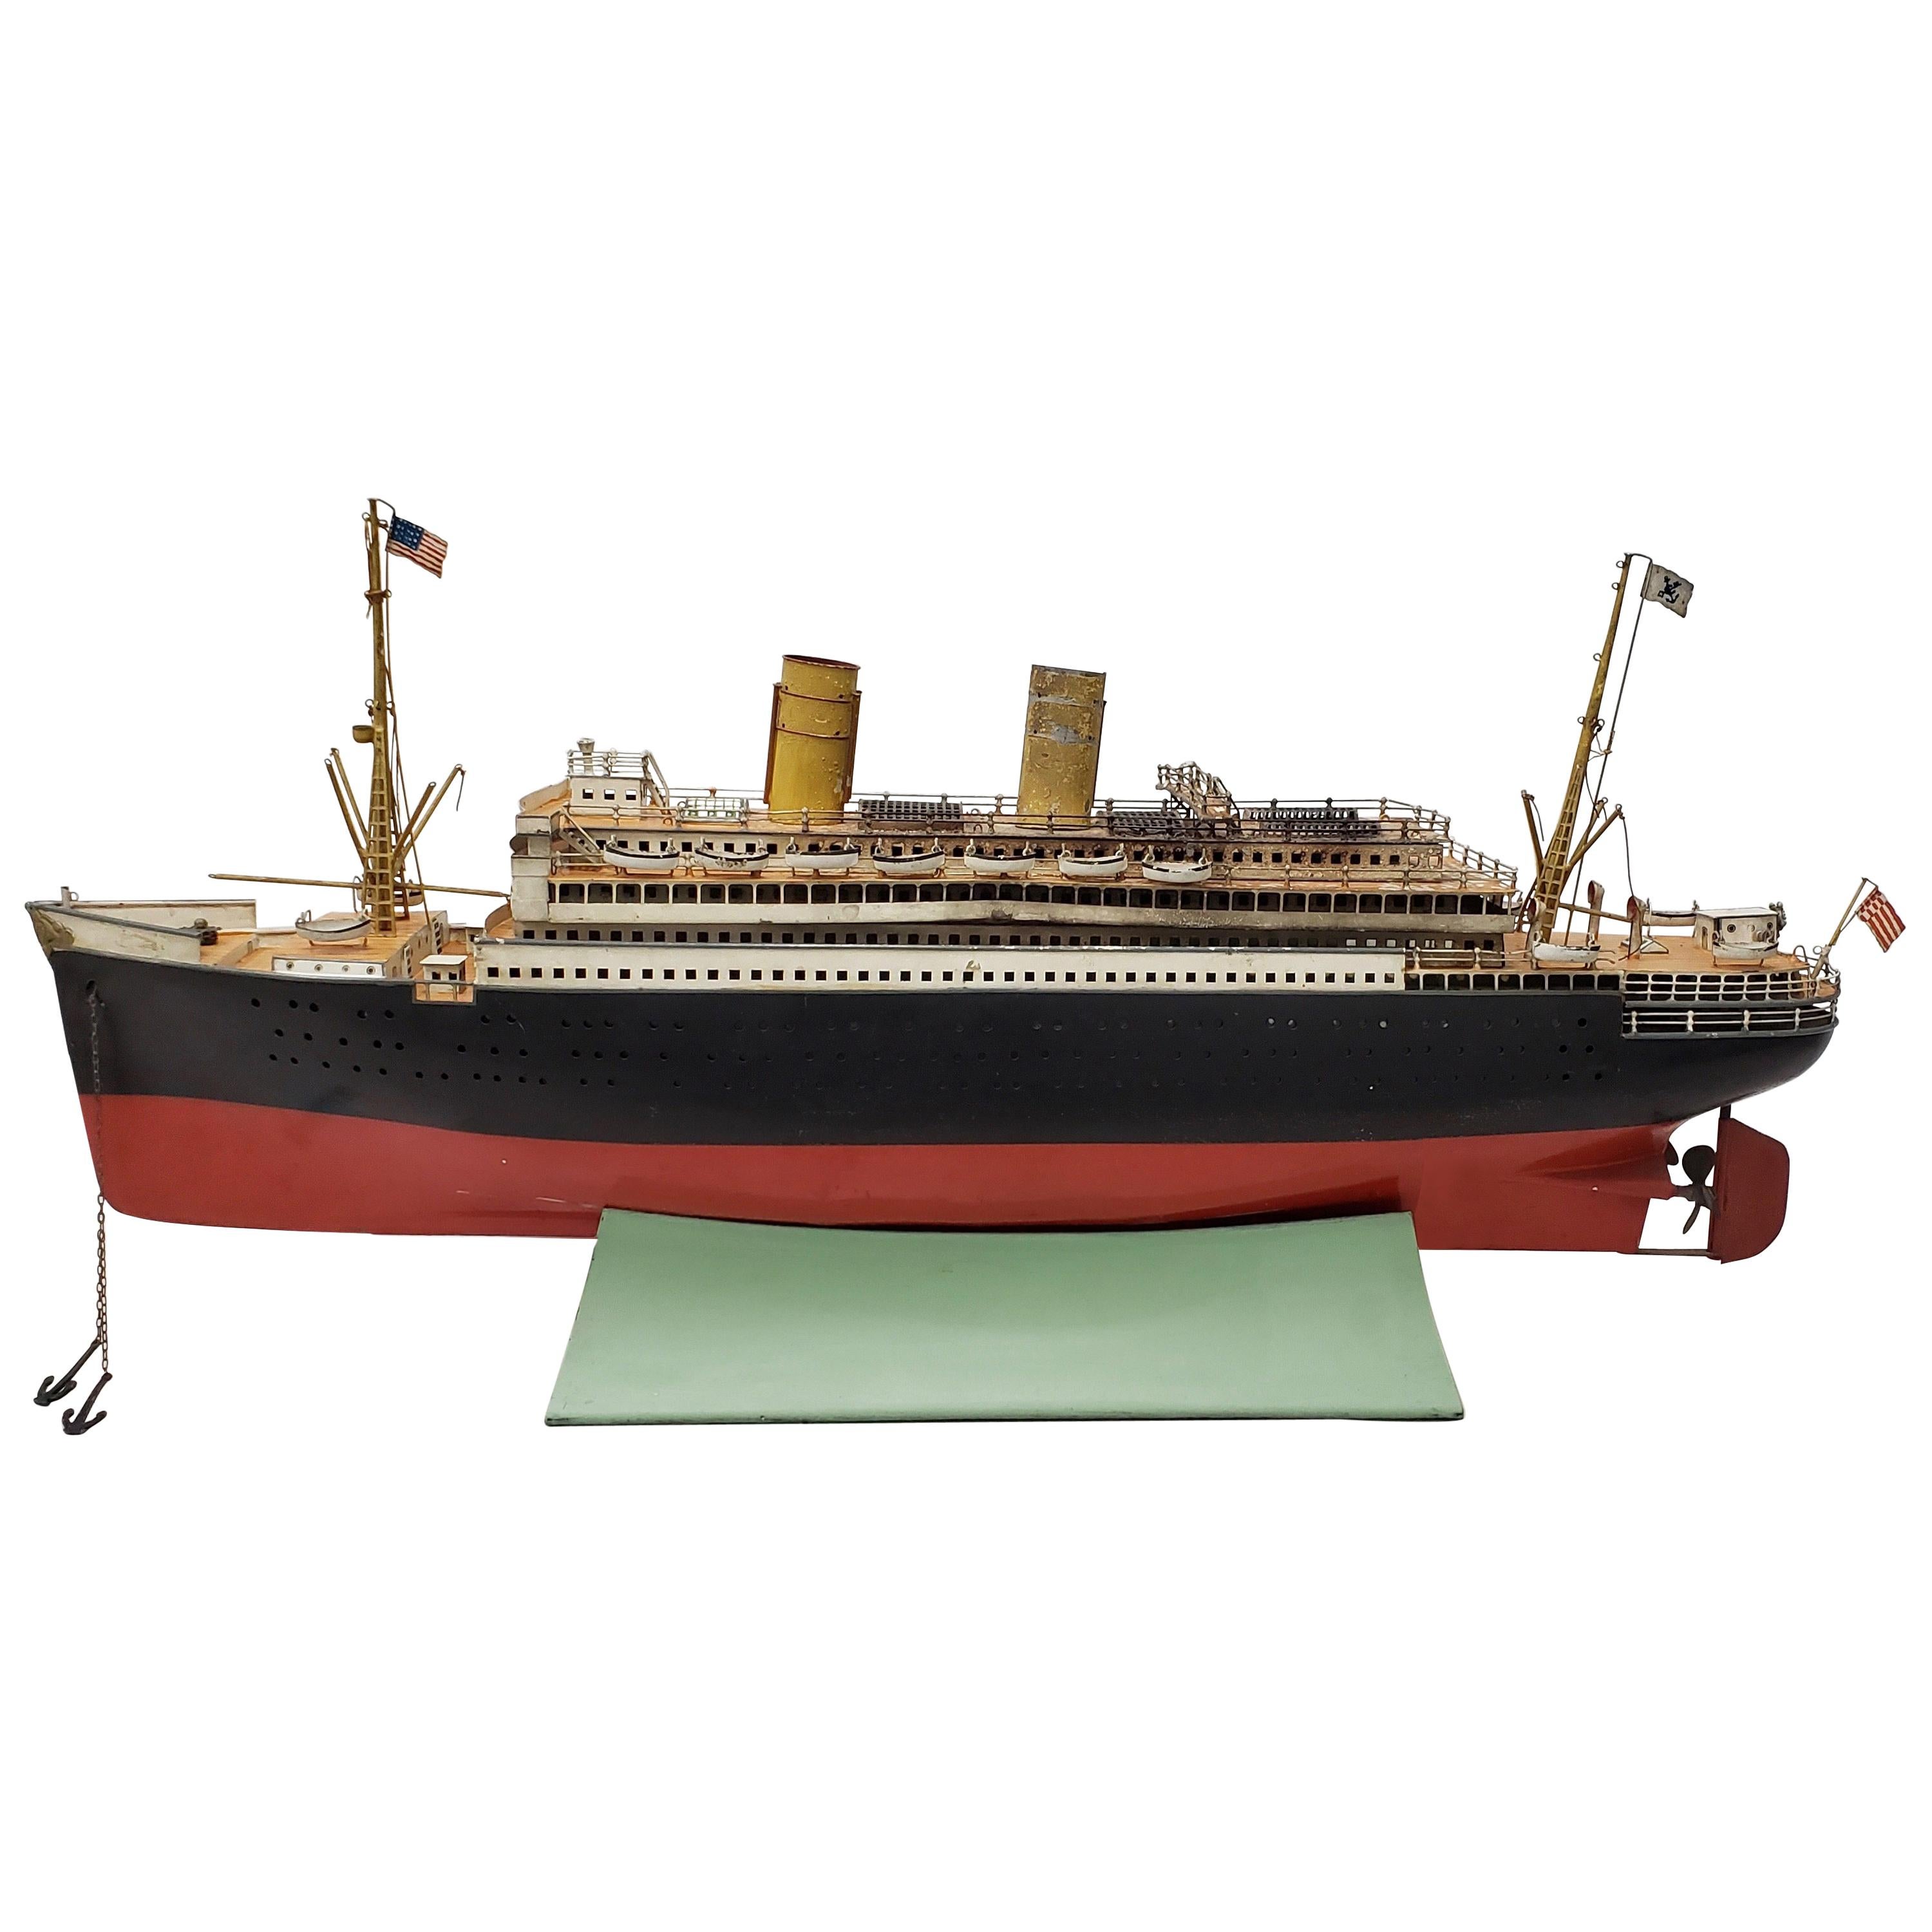 Antique Marklin Ocean Liner with American Flags and Lifeboats, circa 1900